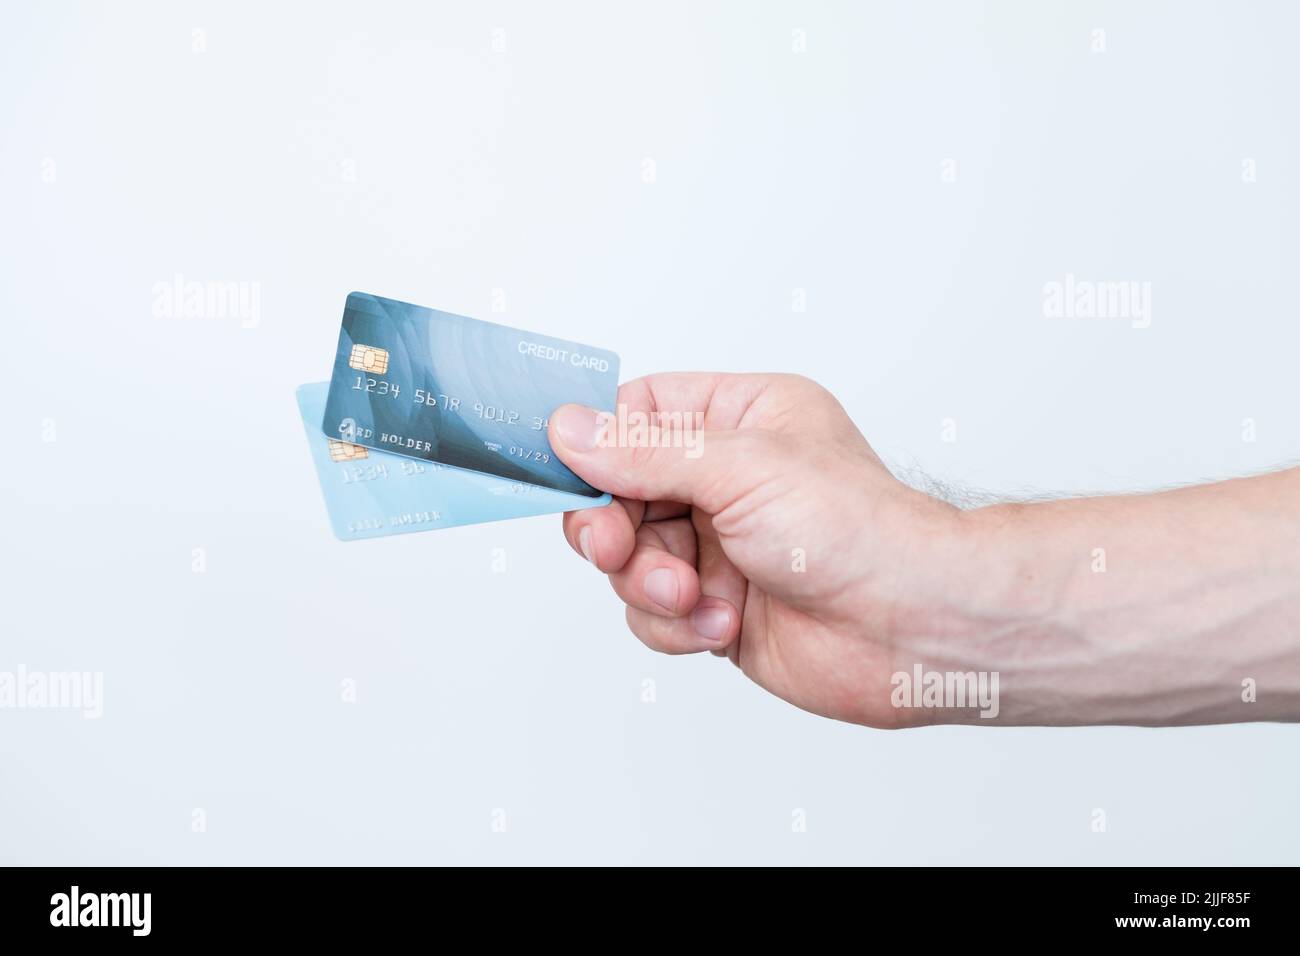 credit card online payment finance manage money Stock Photo